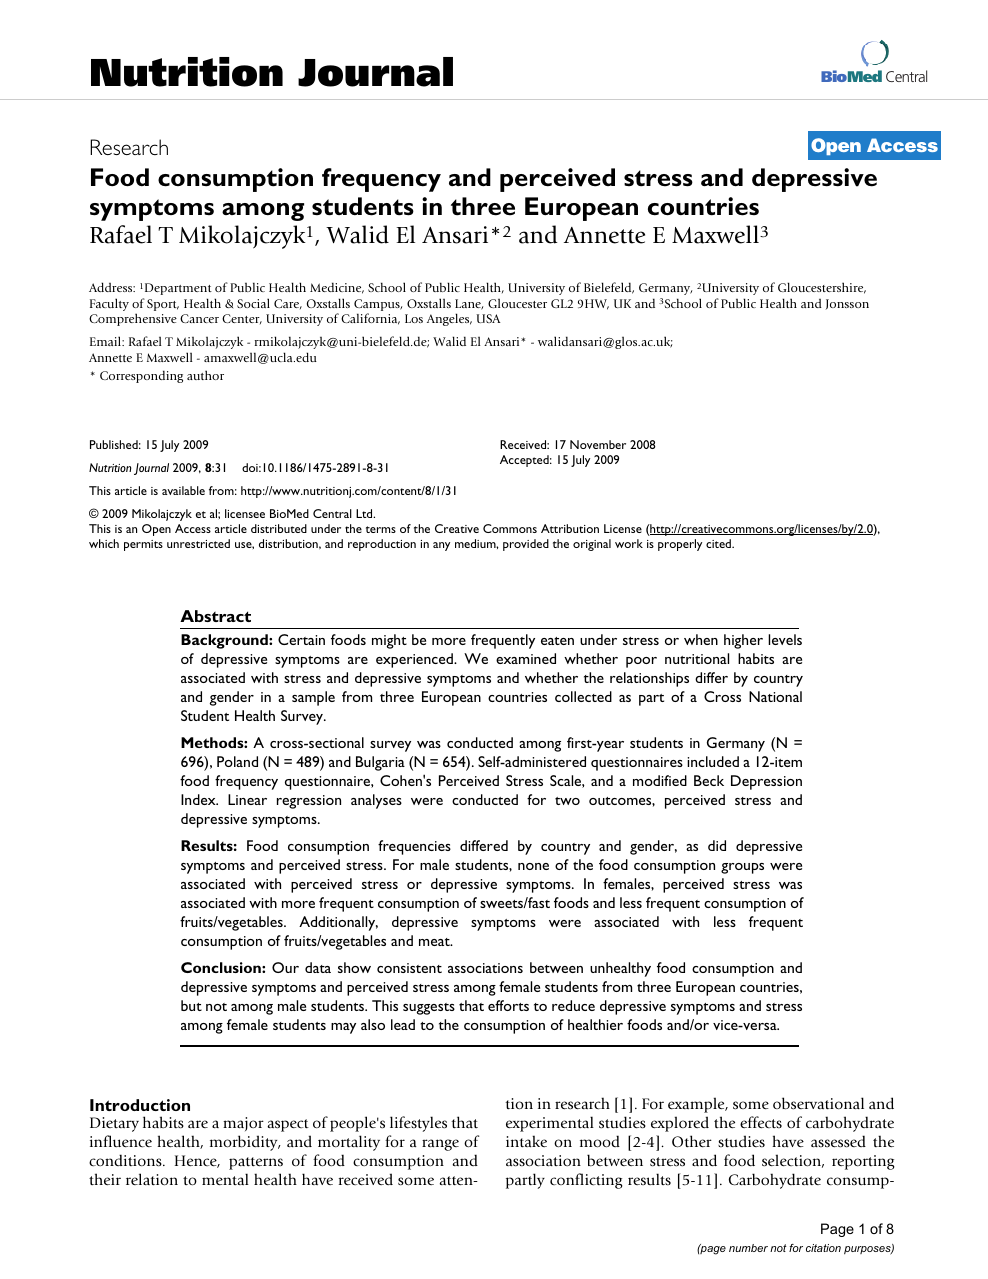 Food Consumption Frequency And Perceived Stress And Depressive Symptoms Among Students In Three European Countries Topic Of Research Paper In Psychology Download Scholarly Article Pdf And Read For Free On Cyberleninka